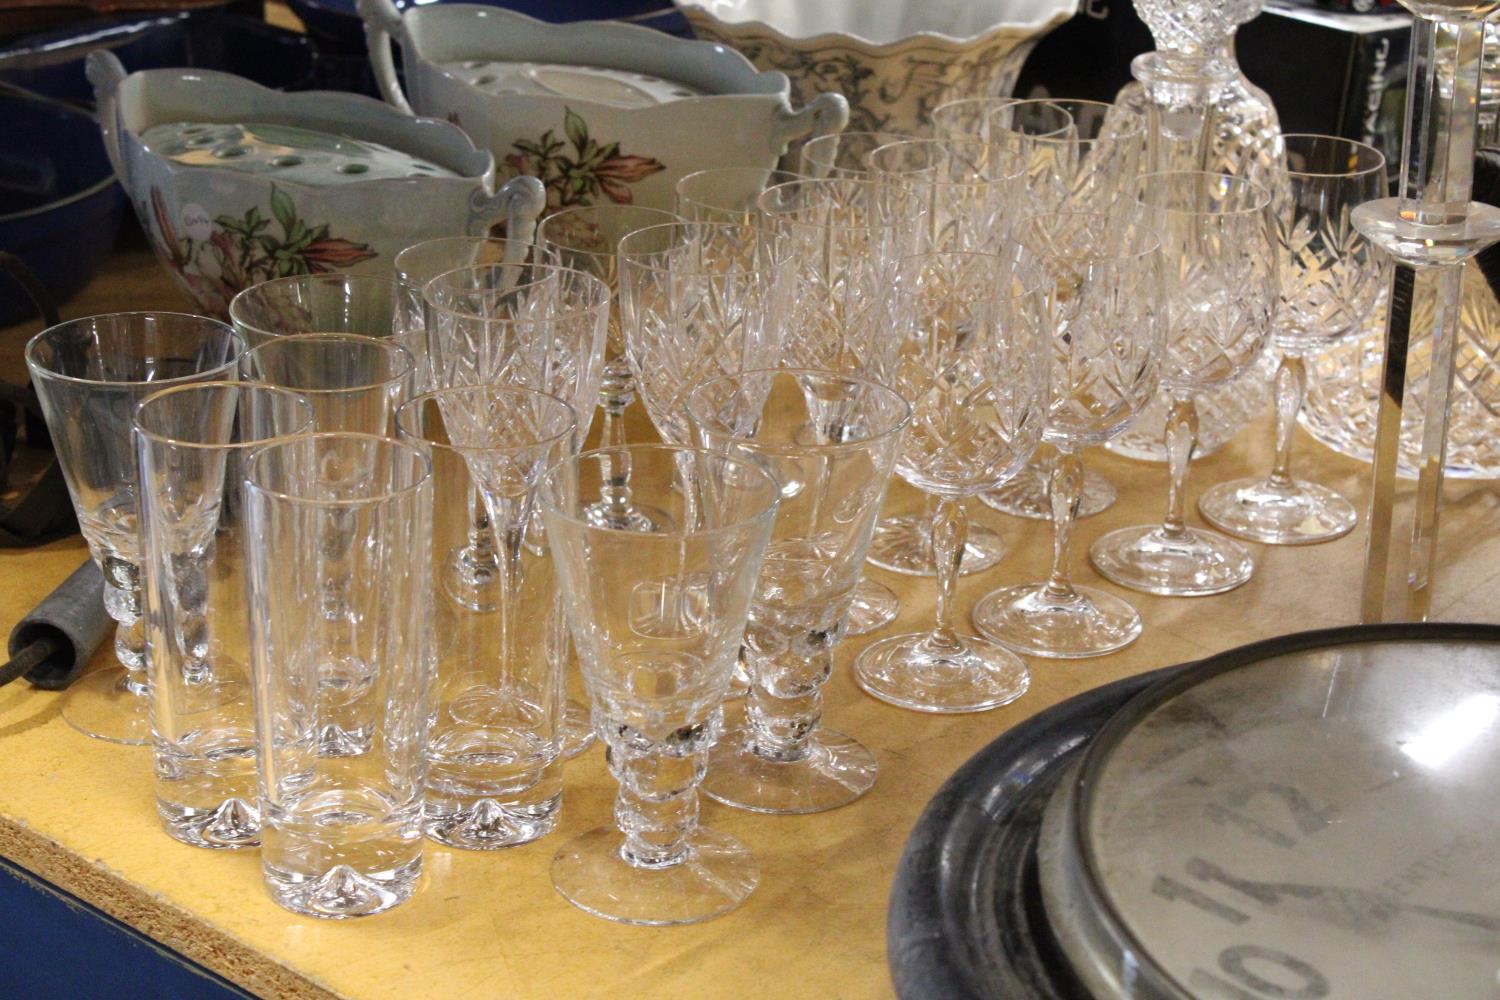 A QUANTITY OF GLASSWARE TO INCLUDE DECANTERS, WINE GLASSES, TUMBLERS, ETC - Image 2 of 5